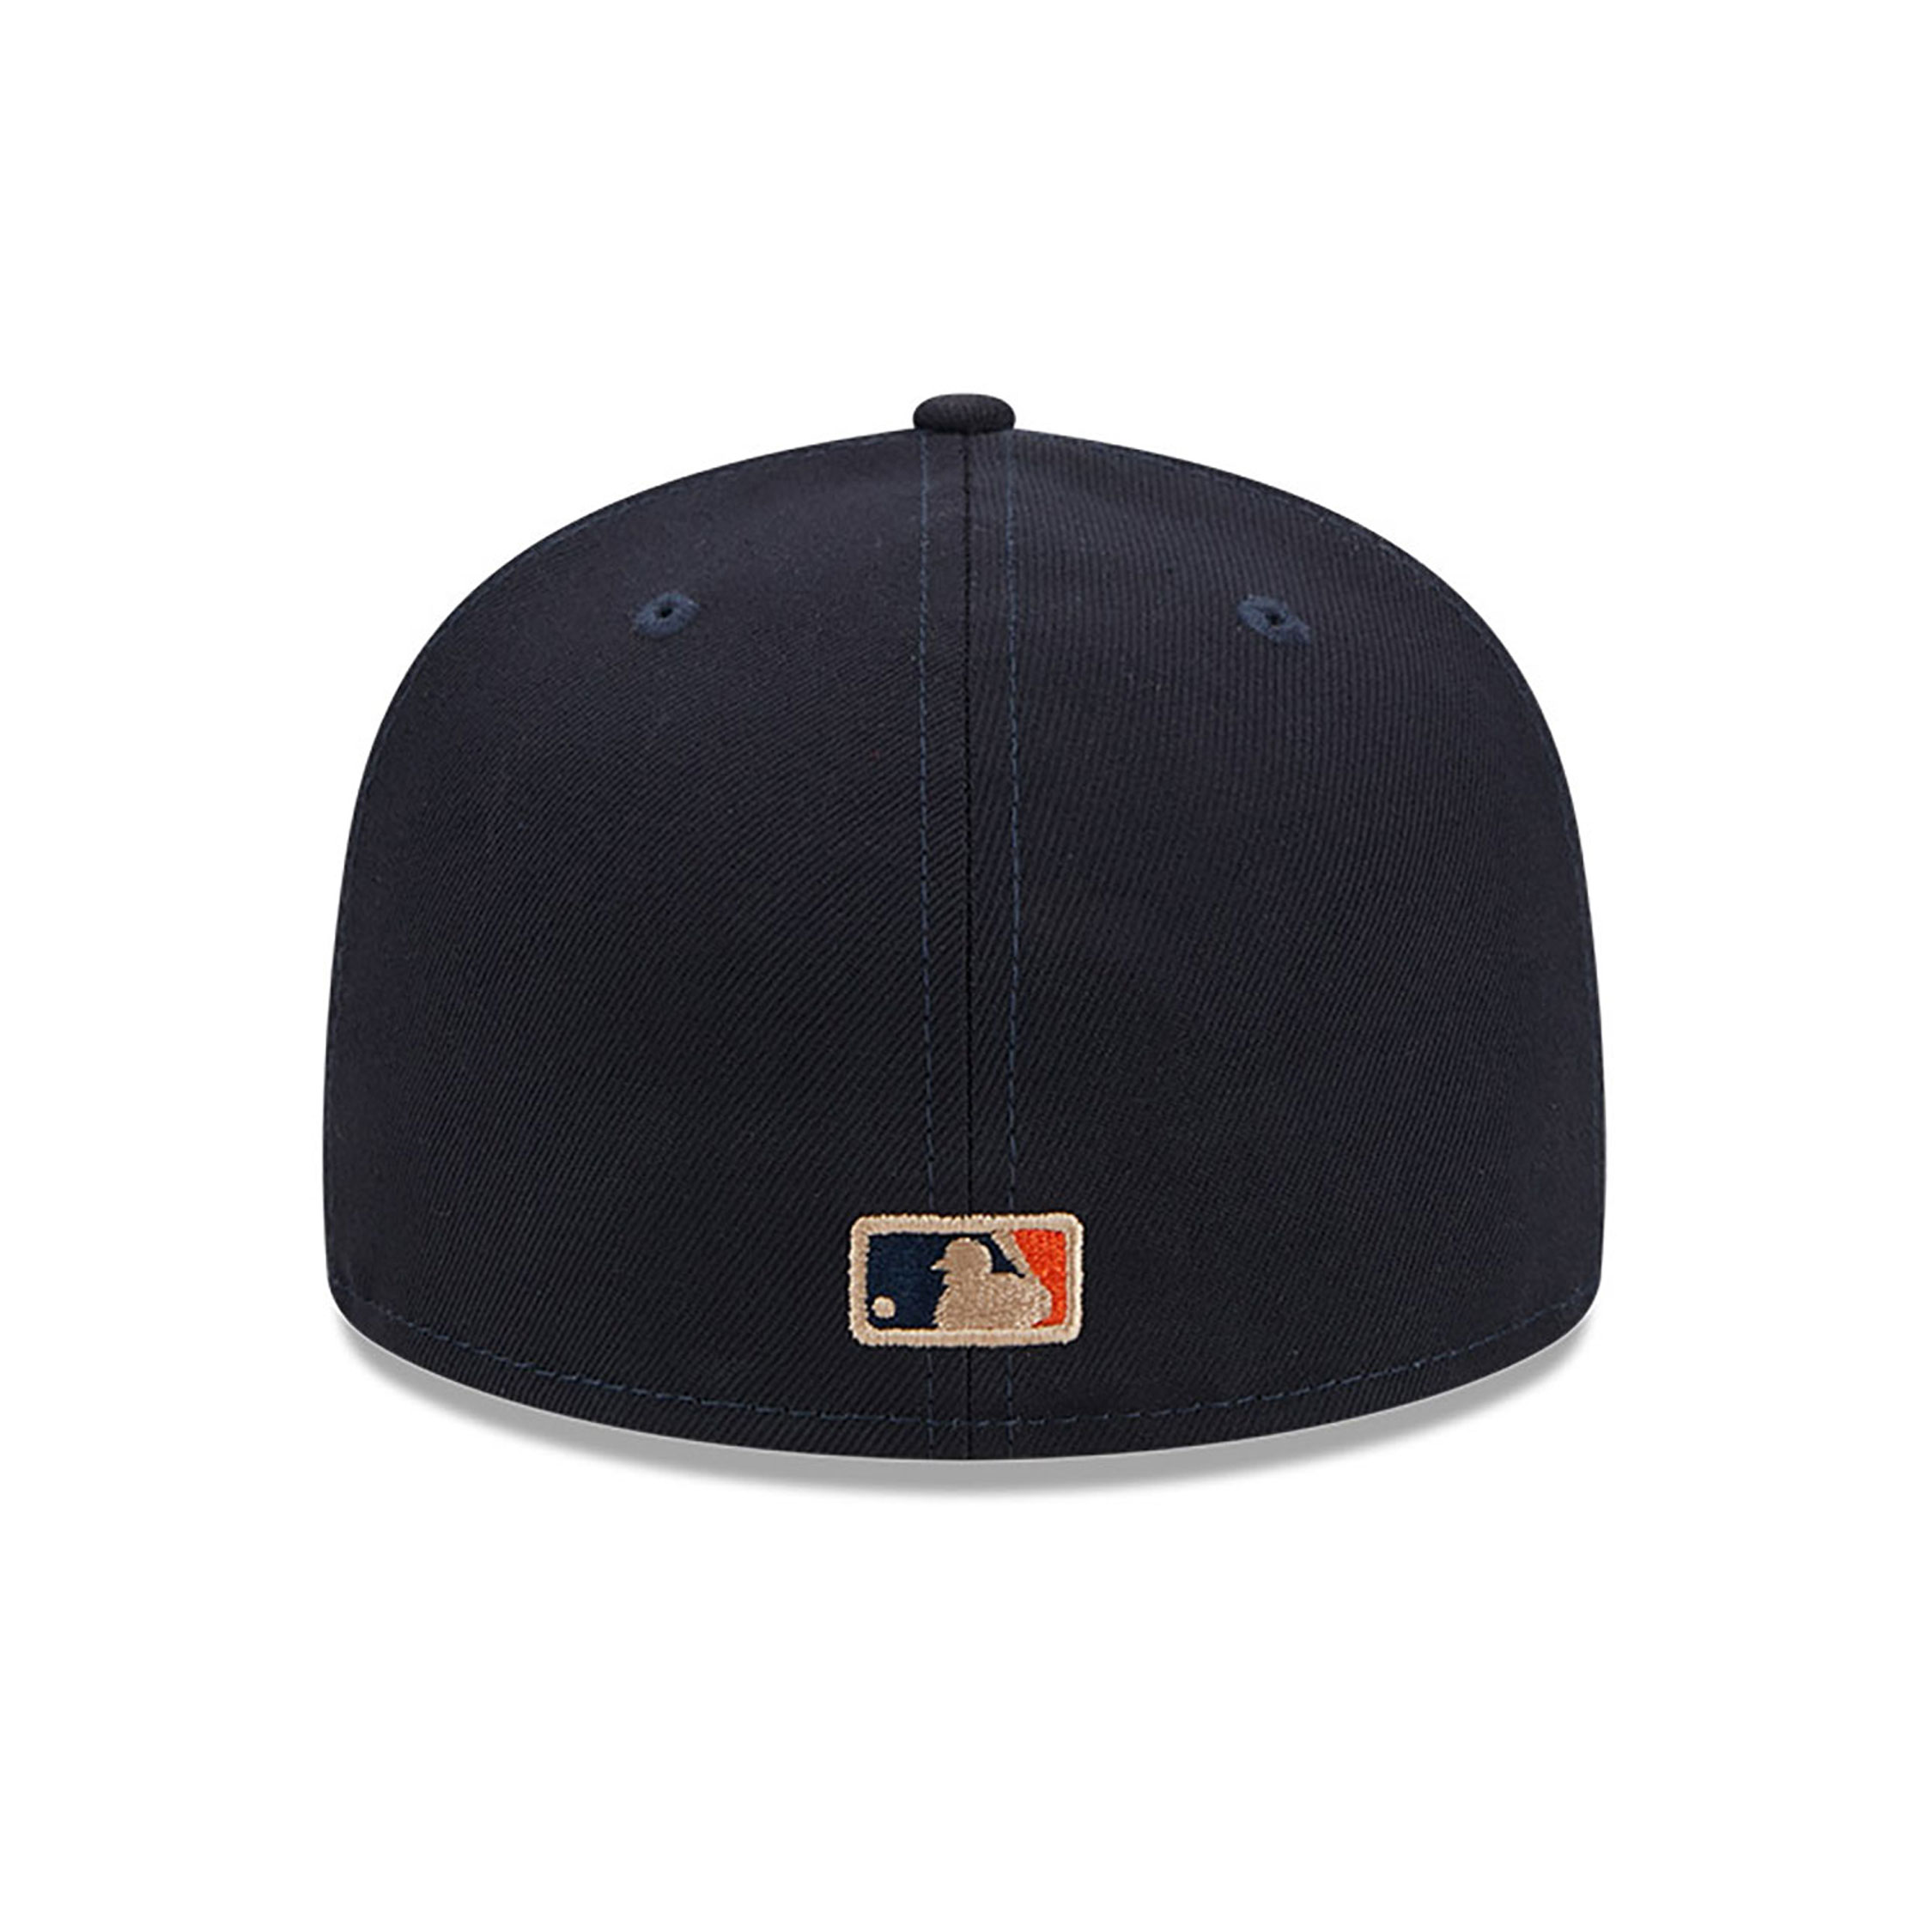 Houston Astros Gold Leaf Navy 59FIFTY Fitted Cap